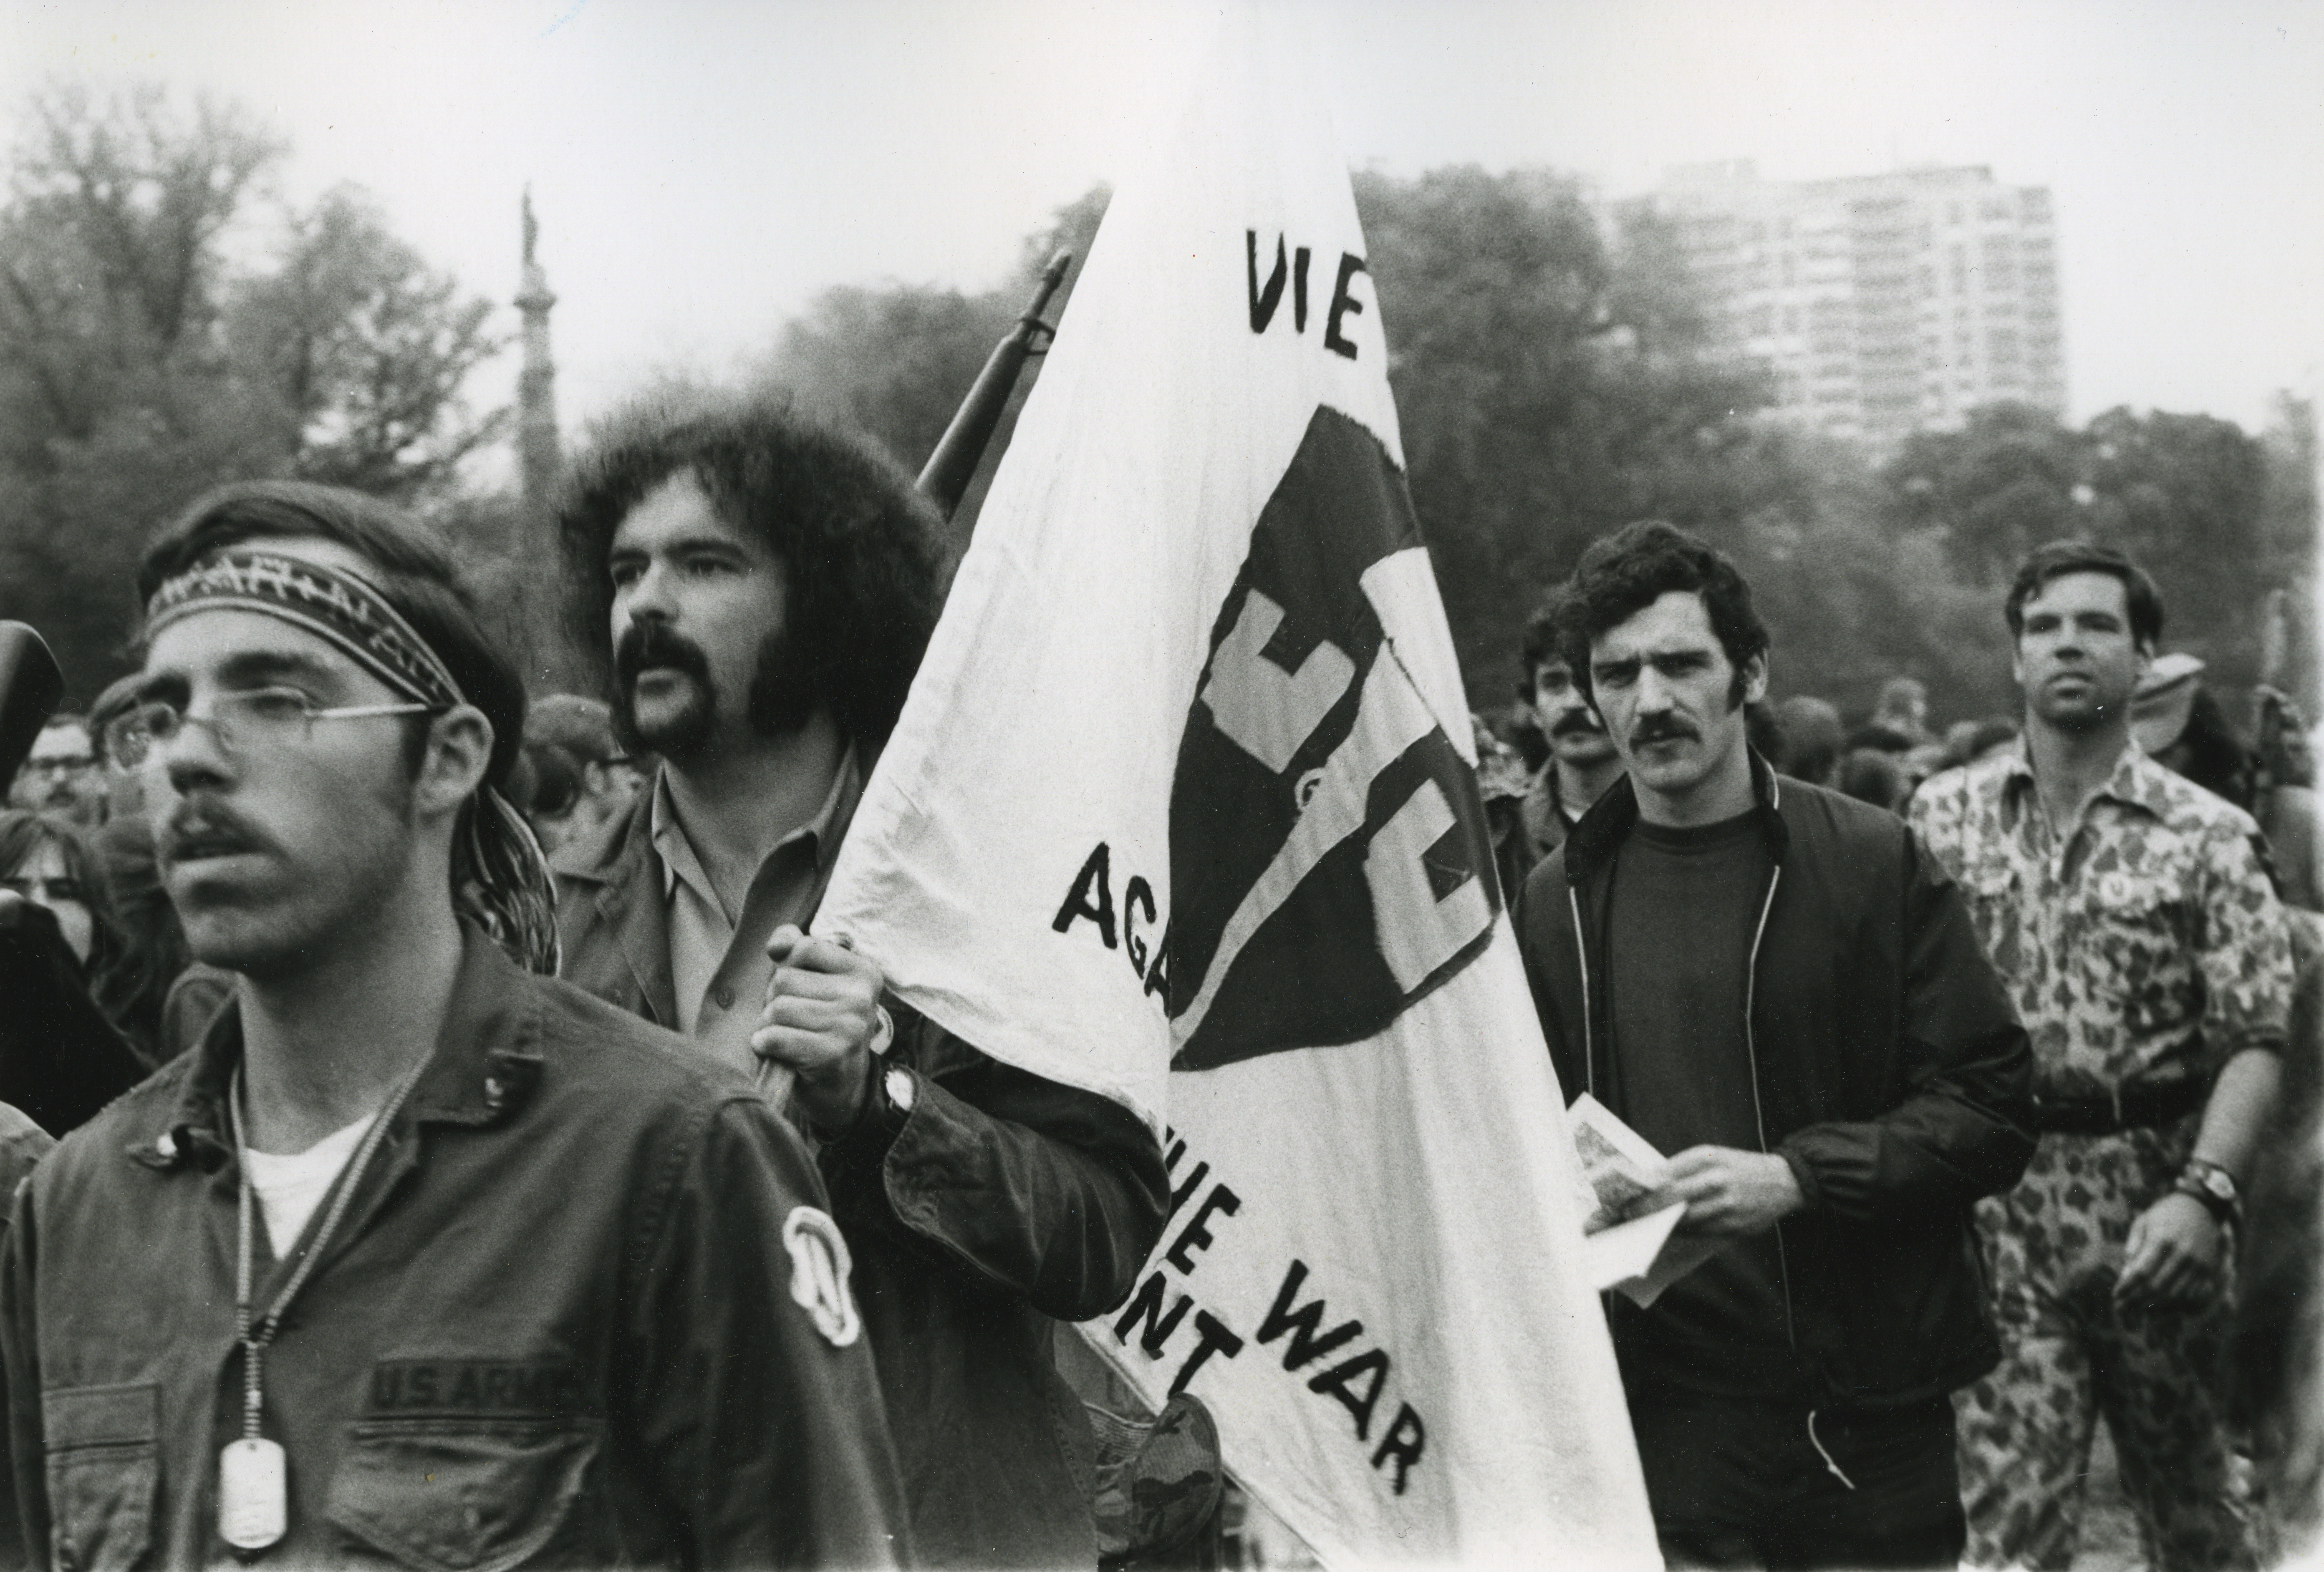 marchers, with close ups of three men, one carrying a Vietnam Veterans Against the War flag